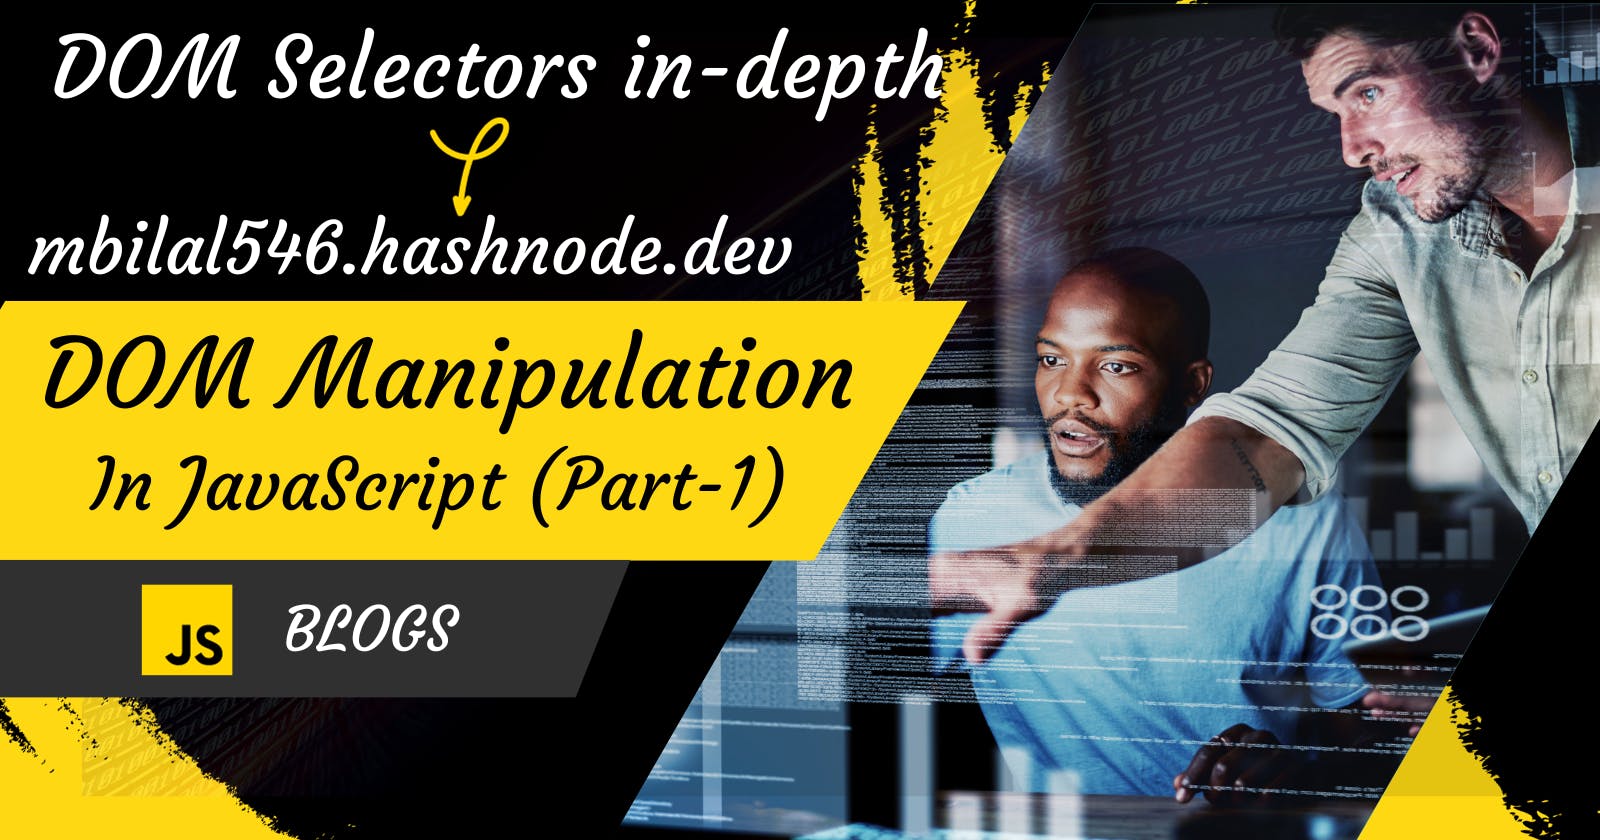 DOM (Document Object Model) Manipulation (Part-1) in JavaScript in depth